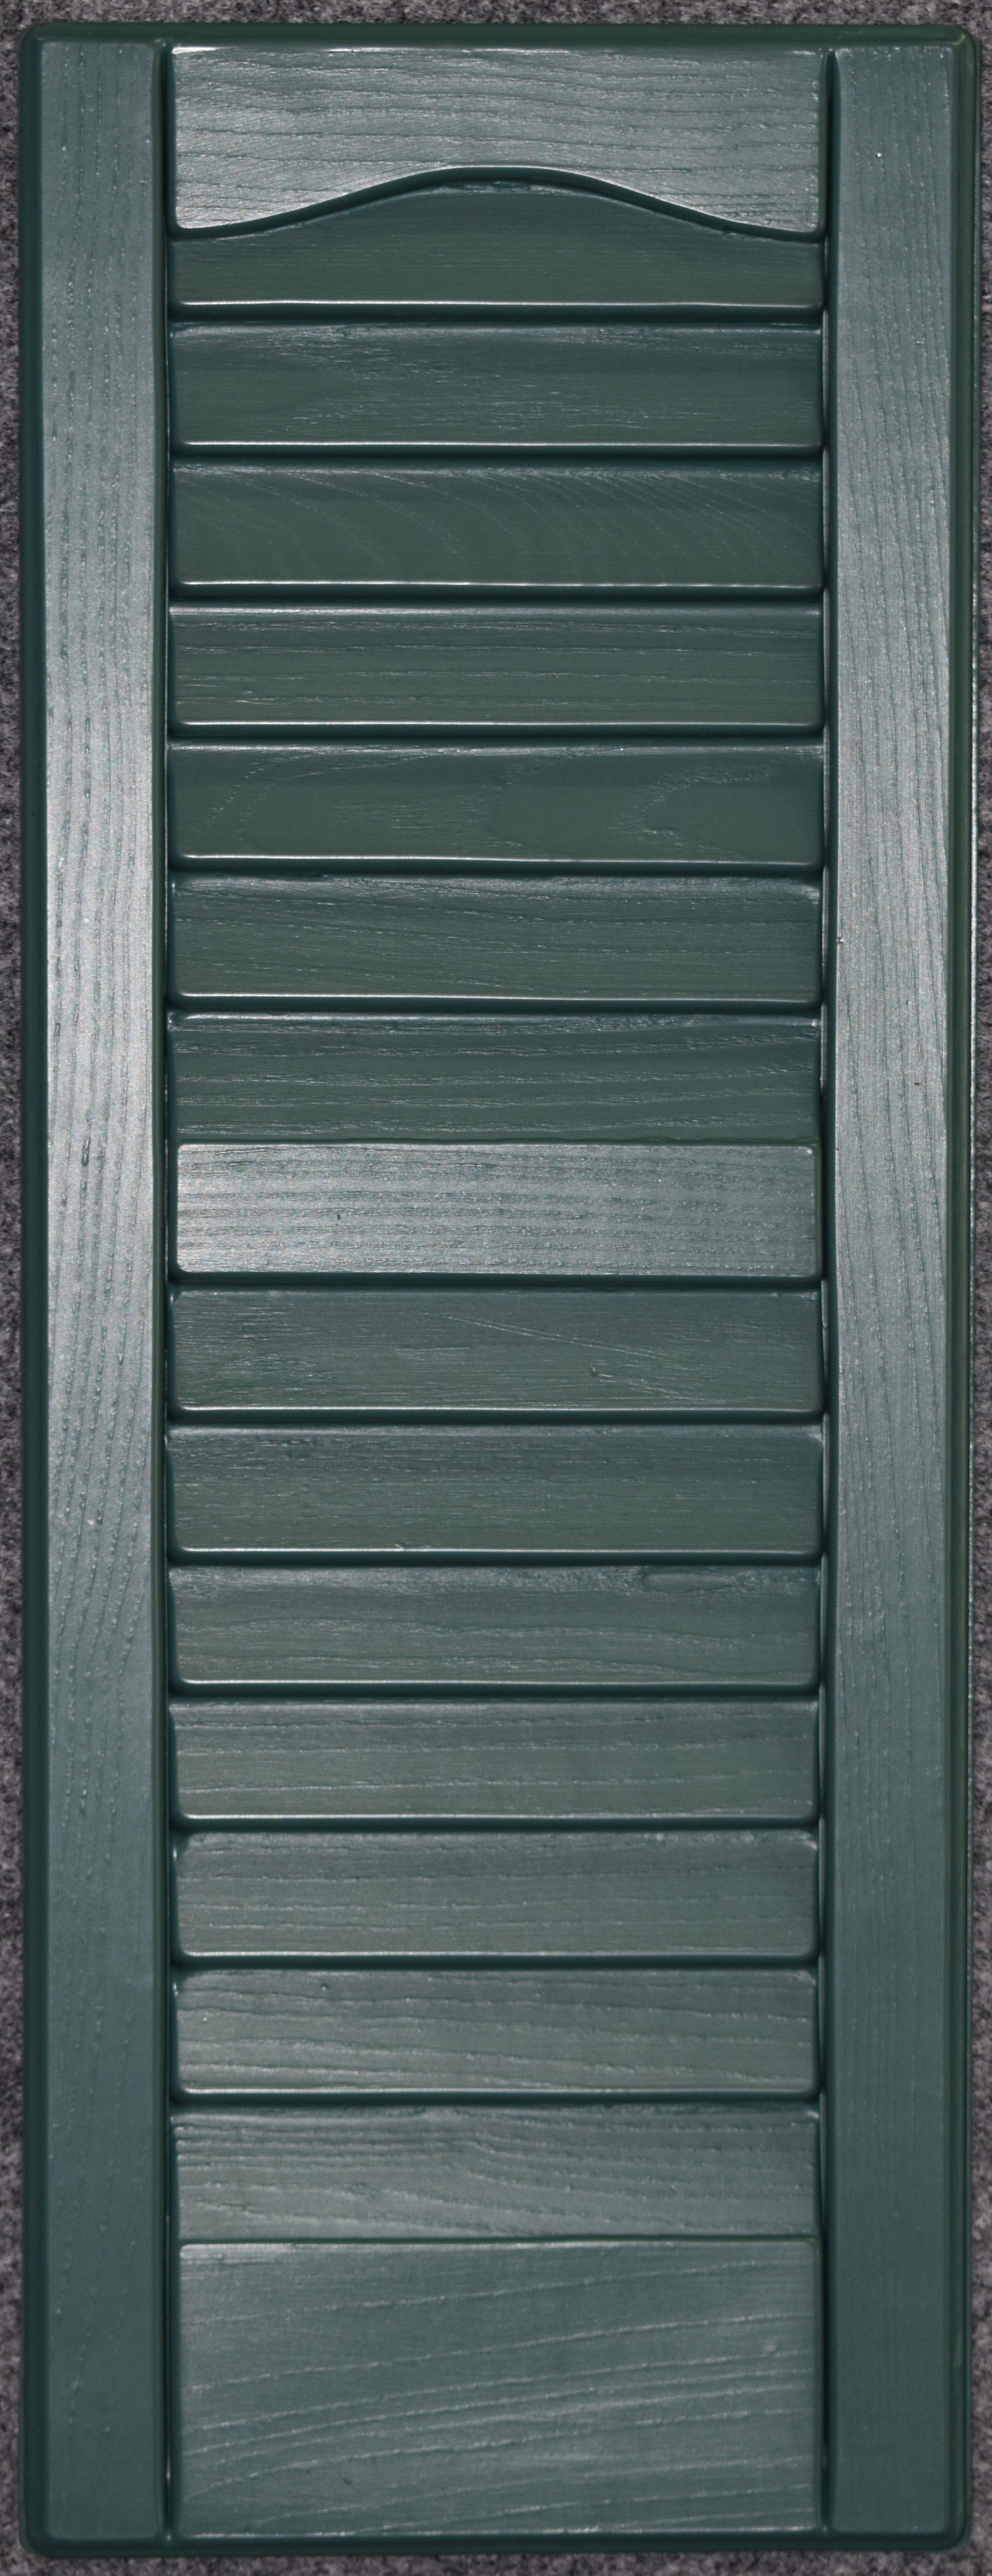 L1231gn-fh 12 X 31 In. Louvered Exterior Decorative Shutters, Hunter Green